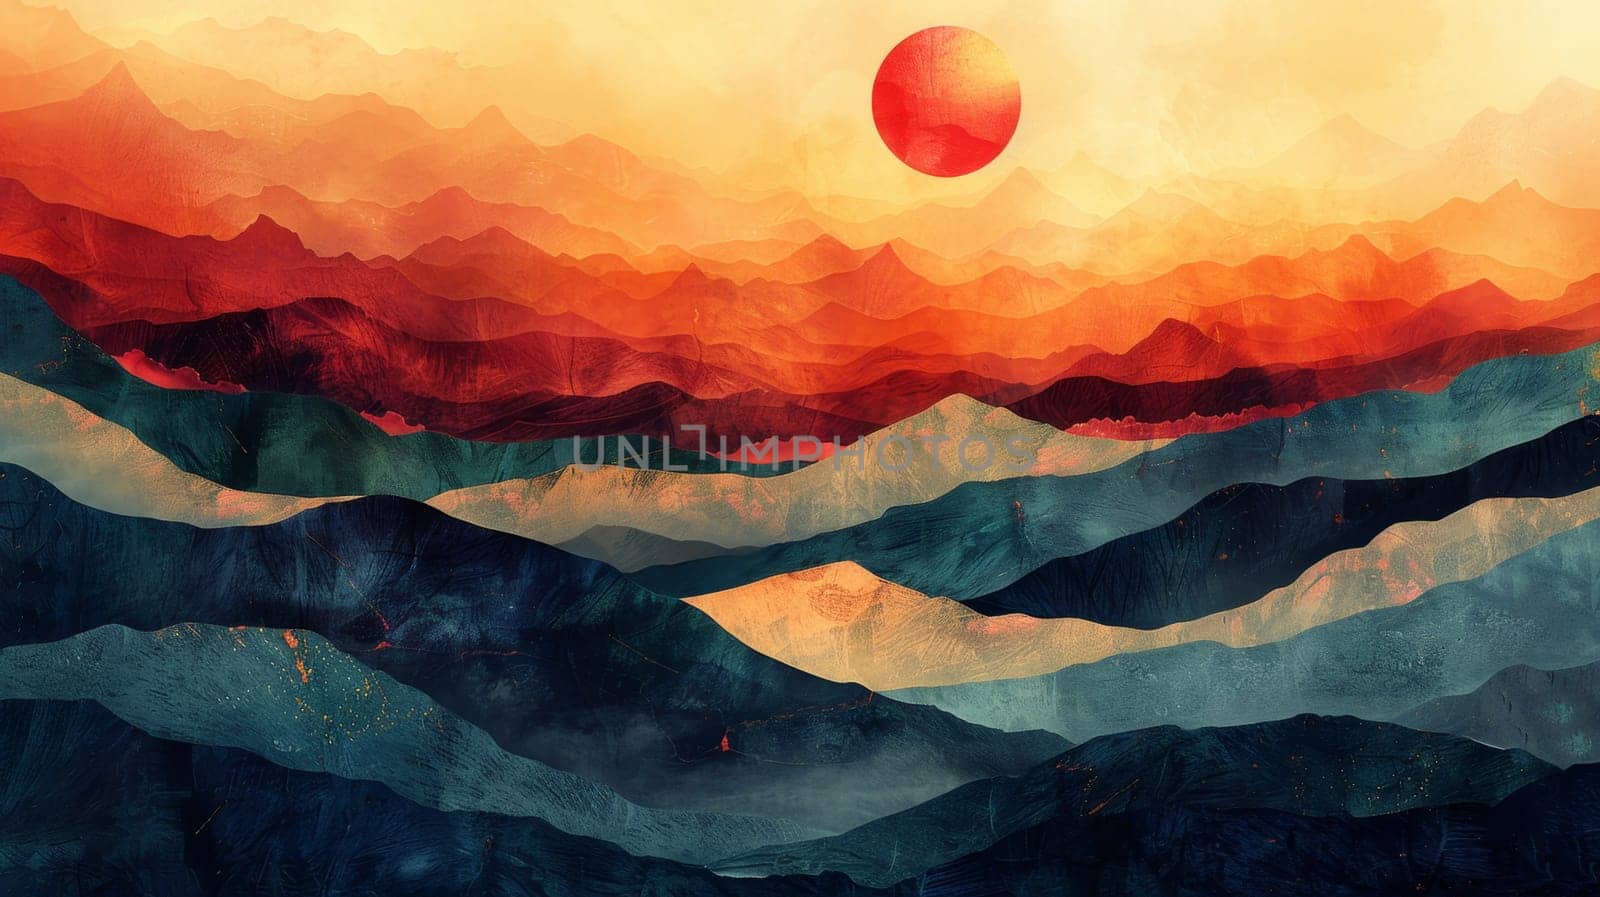 Stylized landscape, abstract view of mountains and setting sun. Illustration.